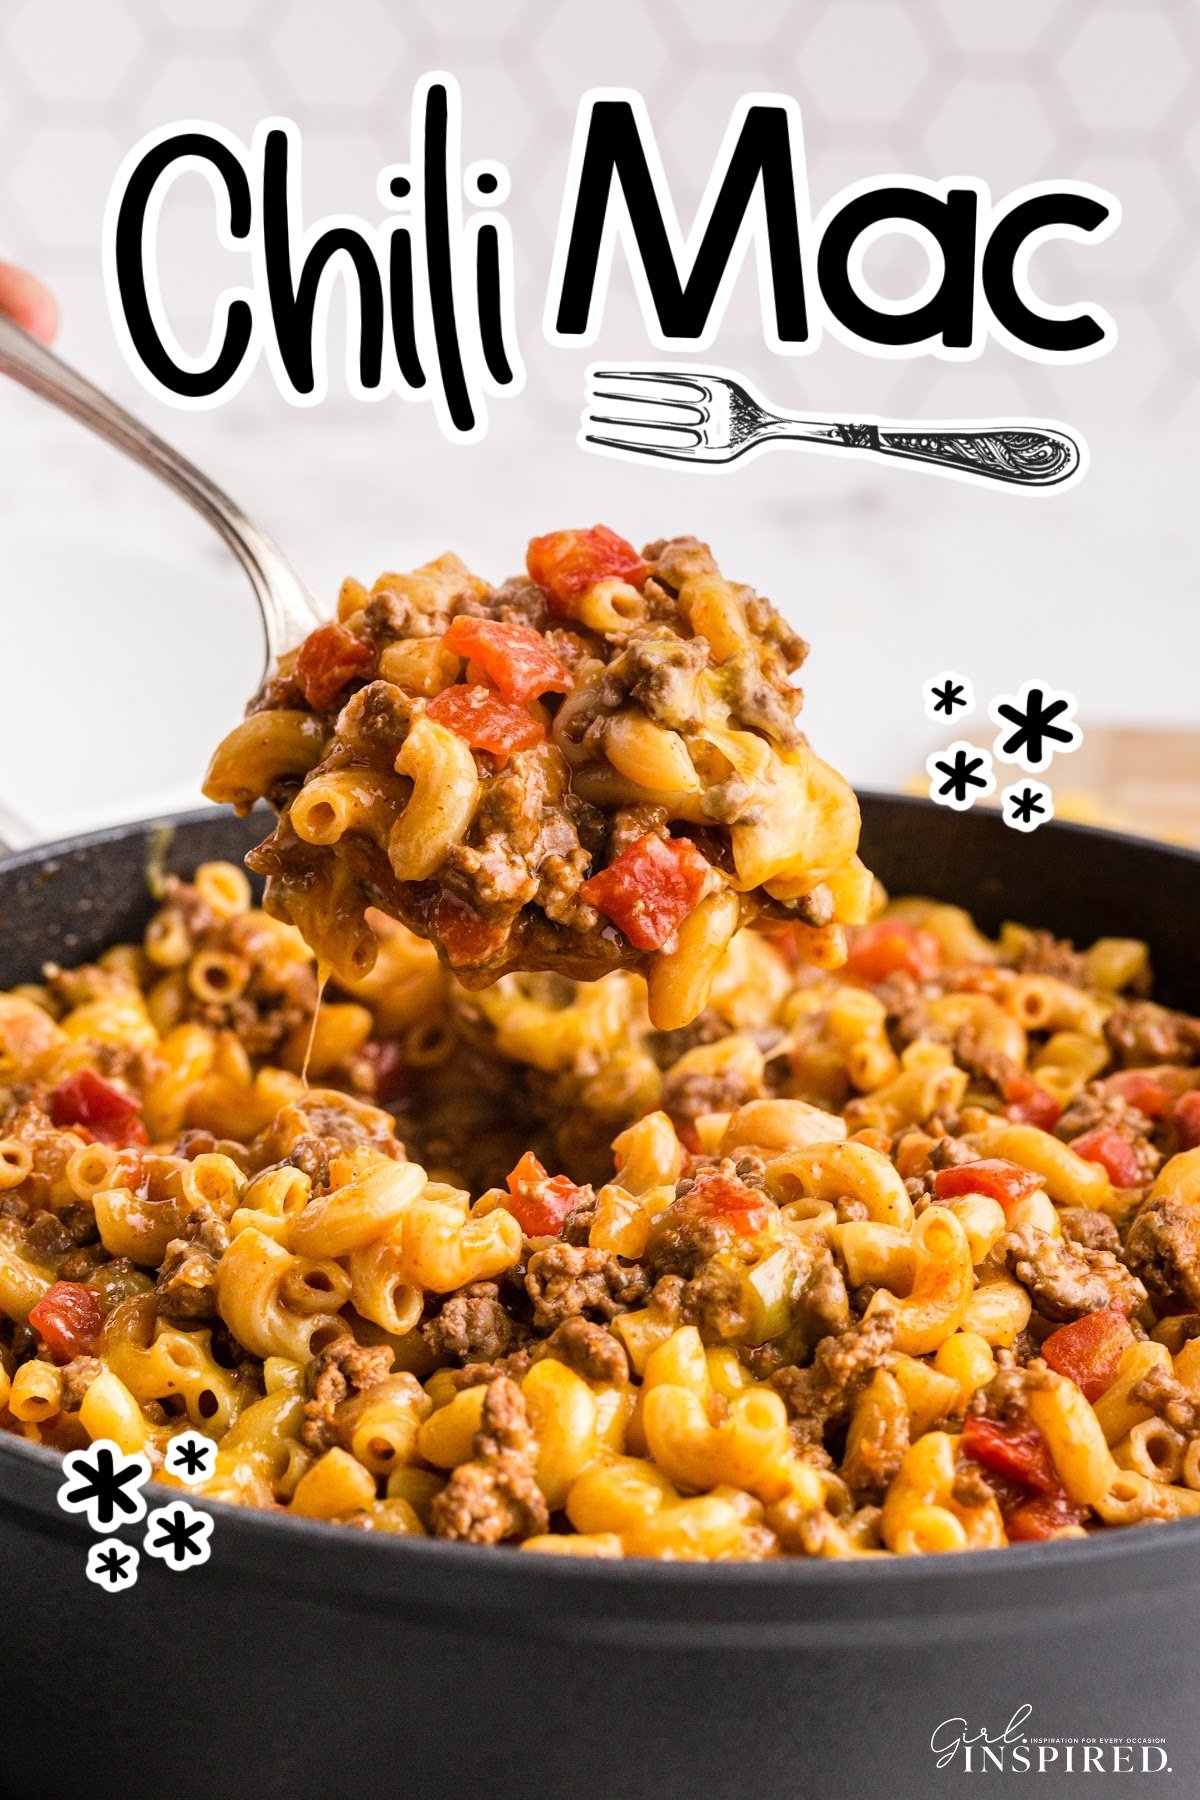 Spoon scooping Chili Mac from saucepan, piled with macaroni noodles, cheese, ground beef, and tomatoes.